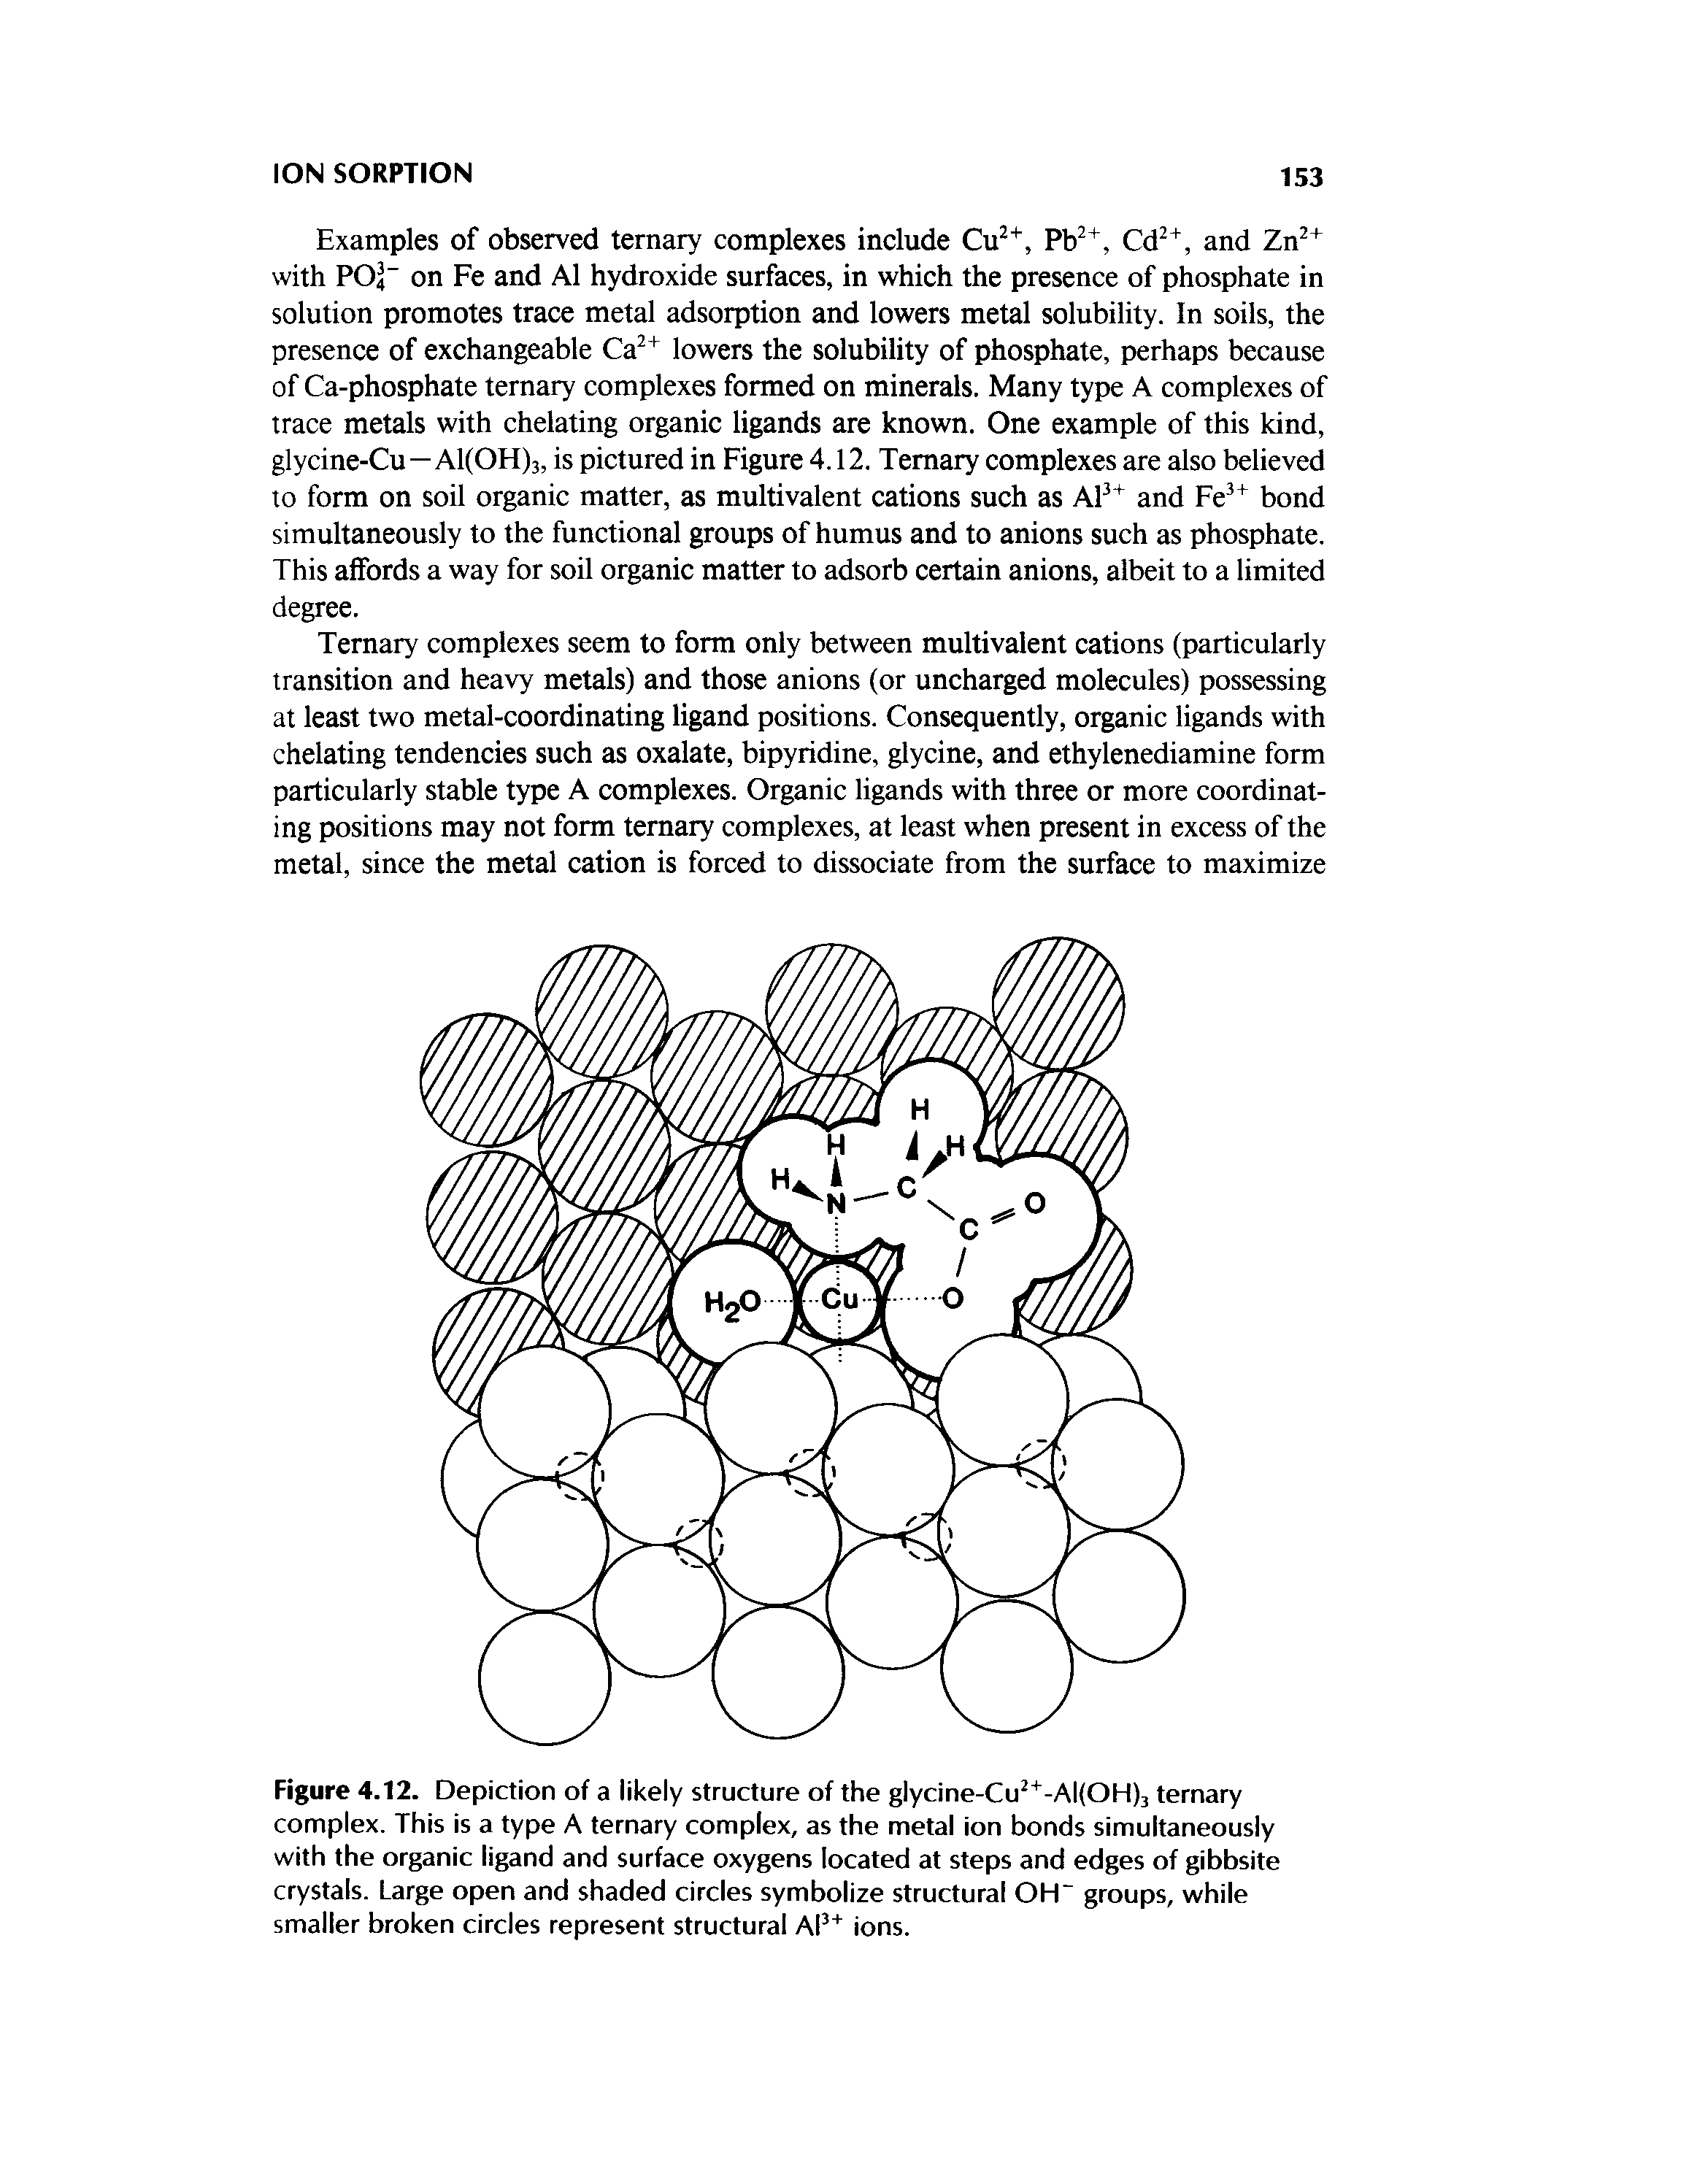 Figure 4.12. Depiction of a likely structure of the glycine-Cu -AI(OH)3 ternary complex. This is a type A ternary complex, as the metal ion bonds simultaneously with the organic ligand and surface oxygens located at steps and edges of gibbsite crystals. Large open and shaded circles symbolize structural OH groups, while smaller broken circles represent structural AP ions.